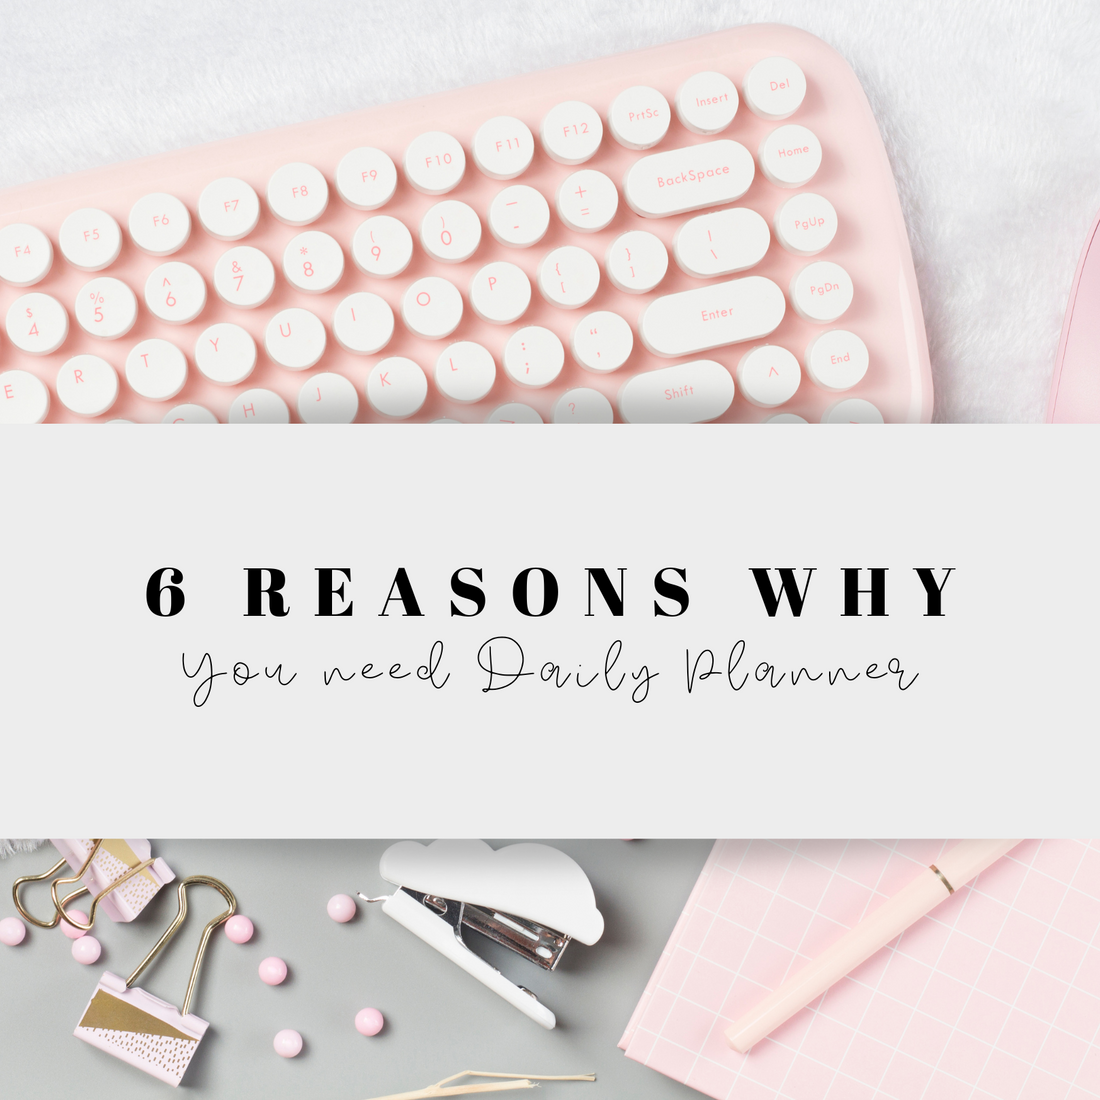 6 Reasons Why You Need Daily Planner